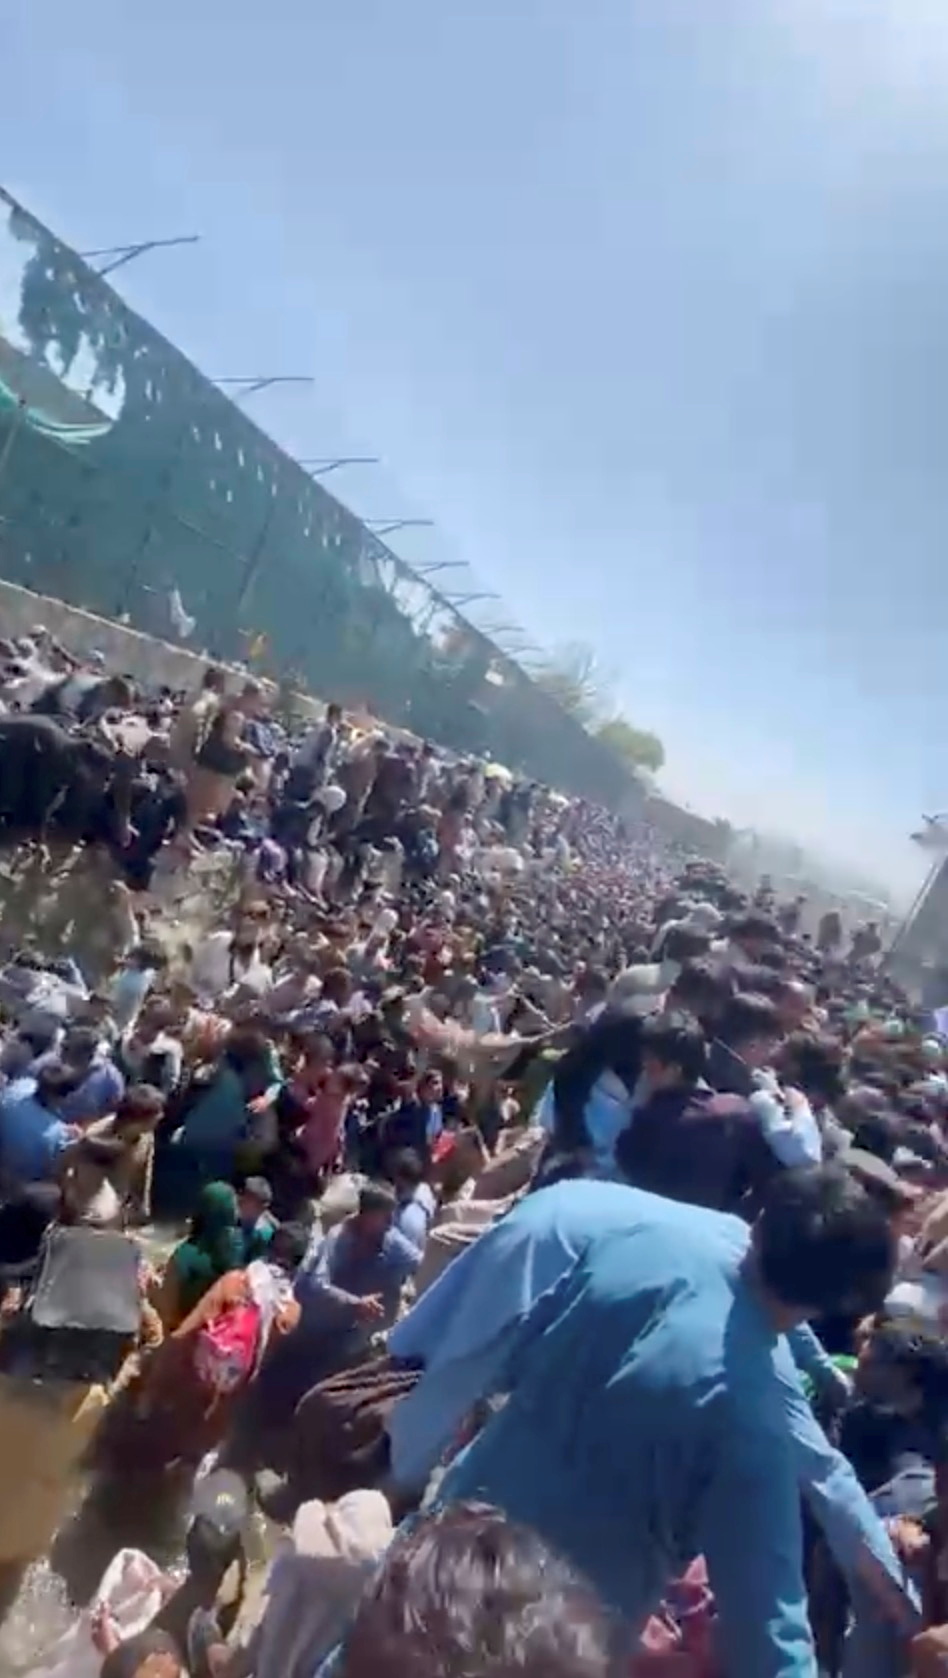 People are crowded before Thursday's attack, along a canal near the Abbey Gate at Kabul's airport, Afghanistan August 26, 2021 in this still grab obtained by REUTERS from a video. 